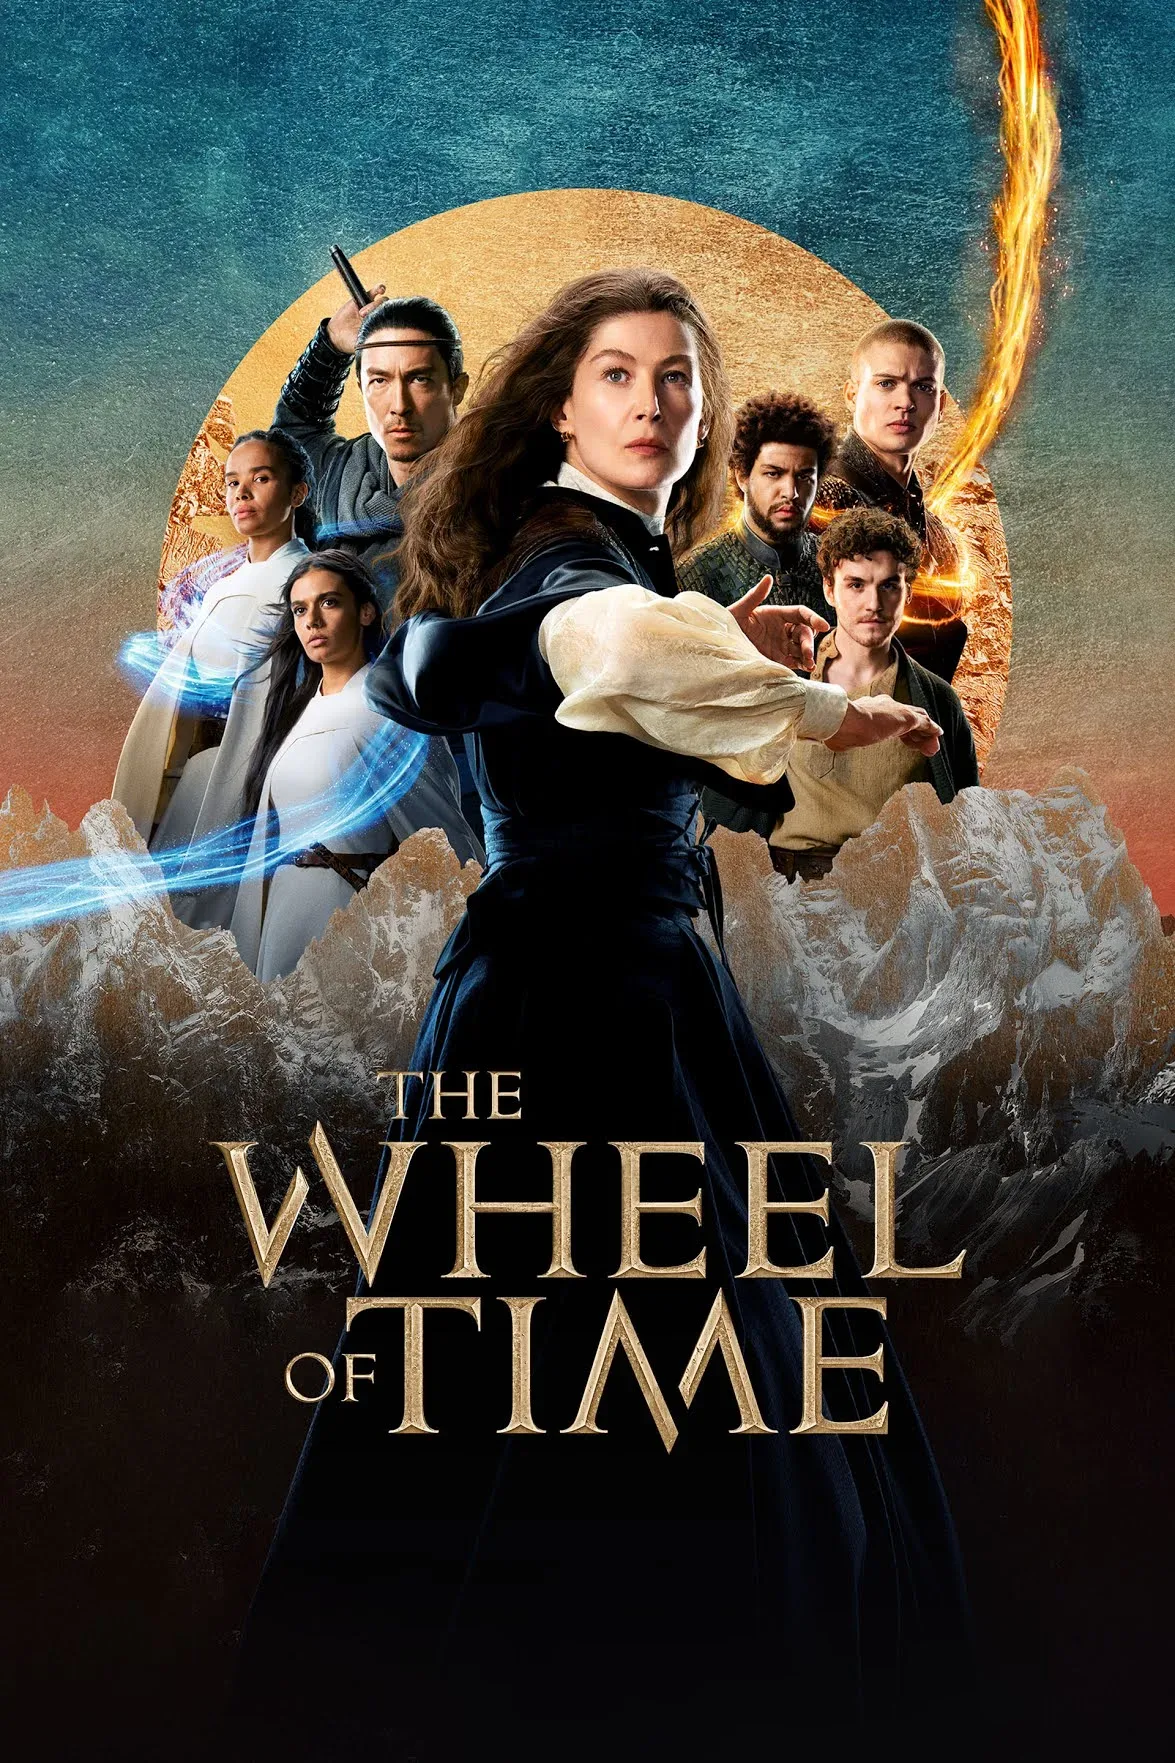 In the series, The Wheel of Time Season 2 - Moiraine, a member of a magical organization, takes five young people on a journey, believing that one of them might be the reincarnation of the Dragon, a powerful individual prophesied to save the world or destroy it.